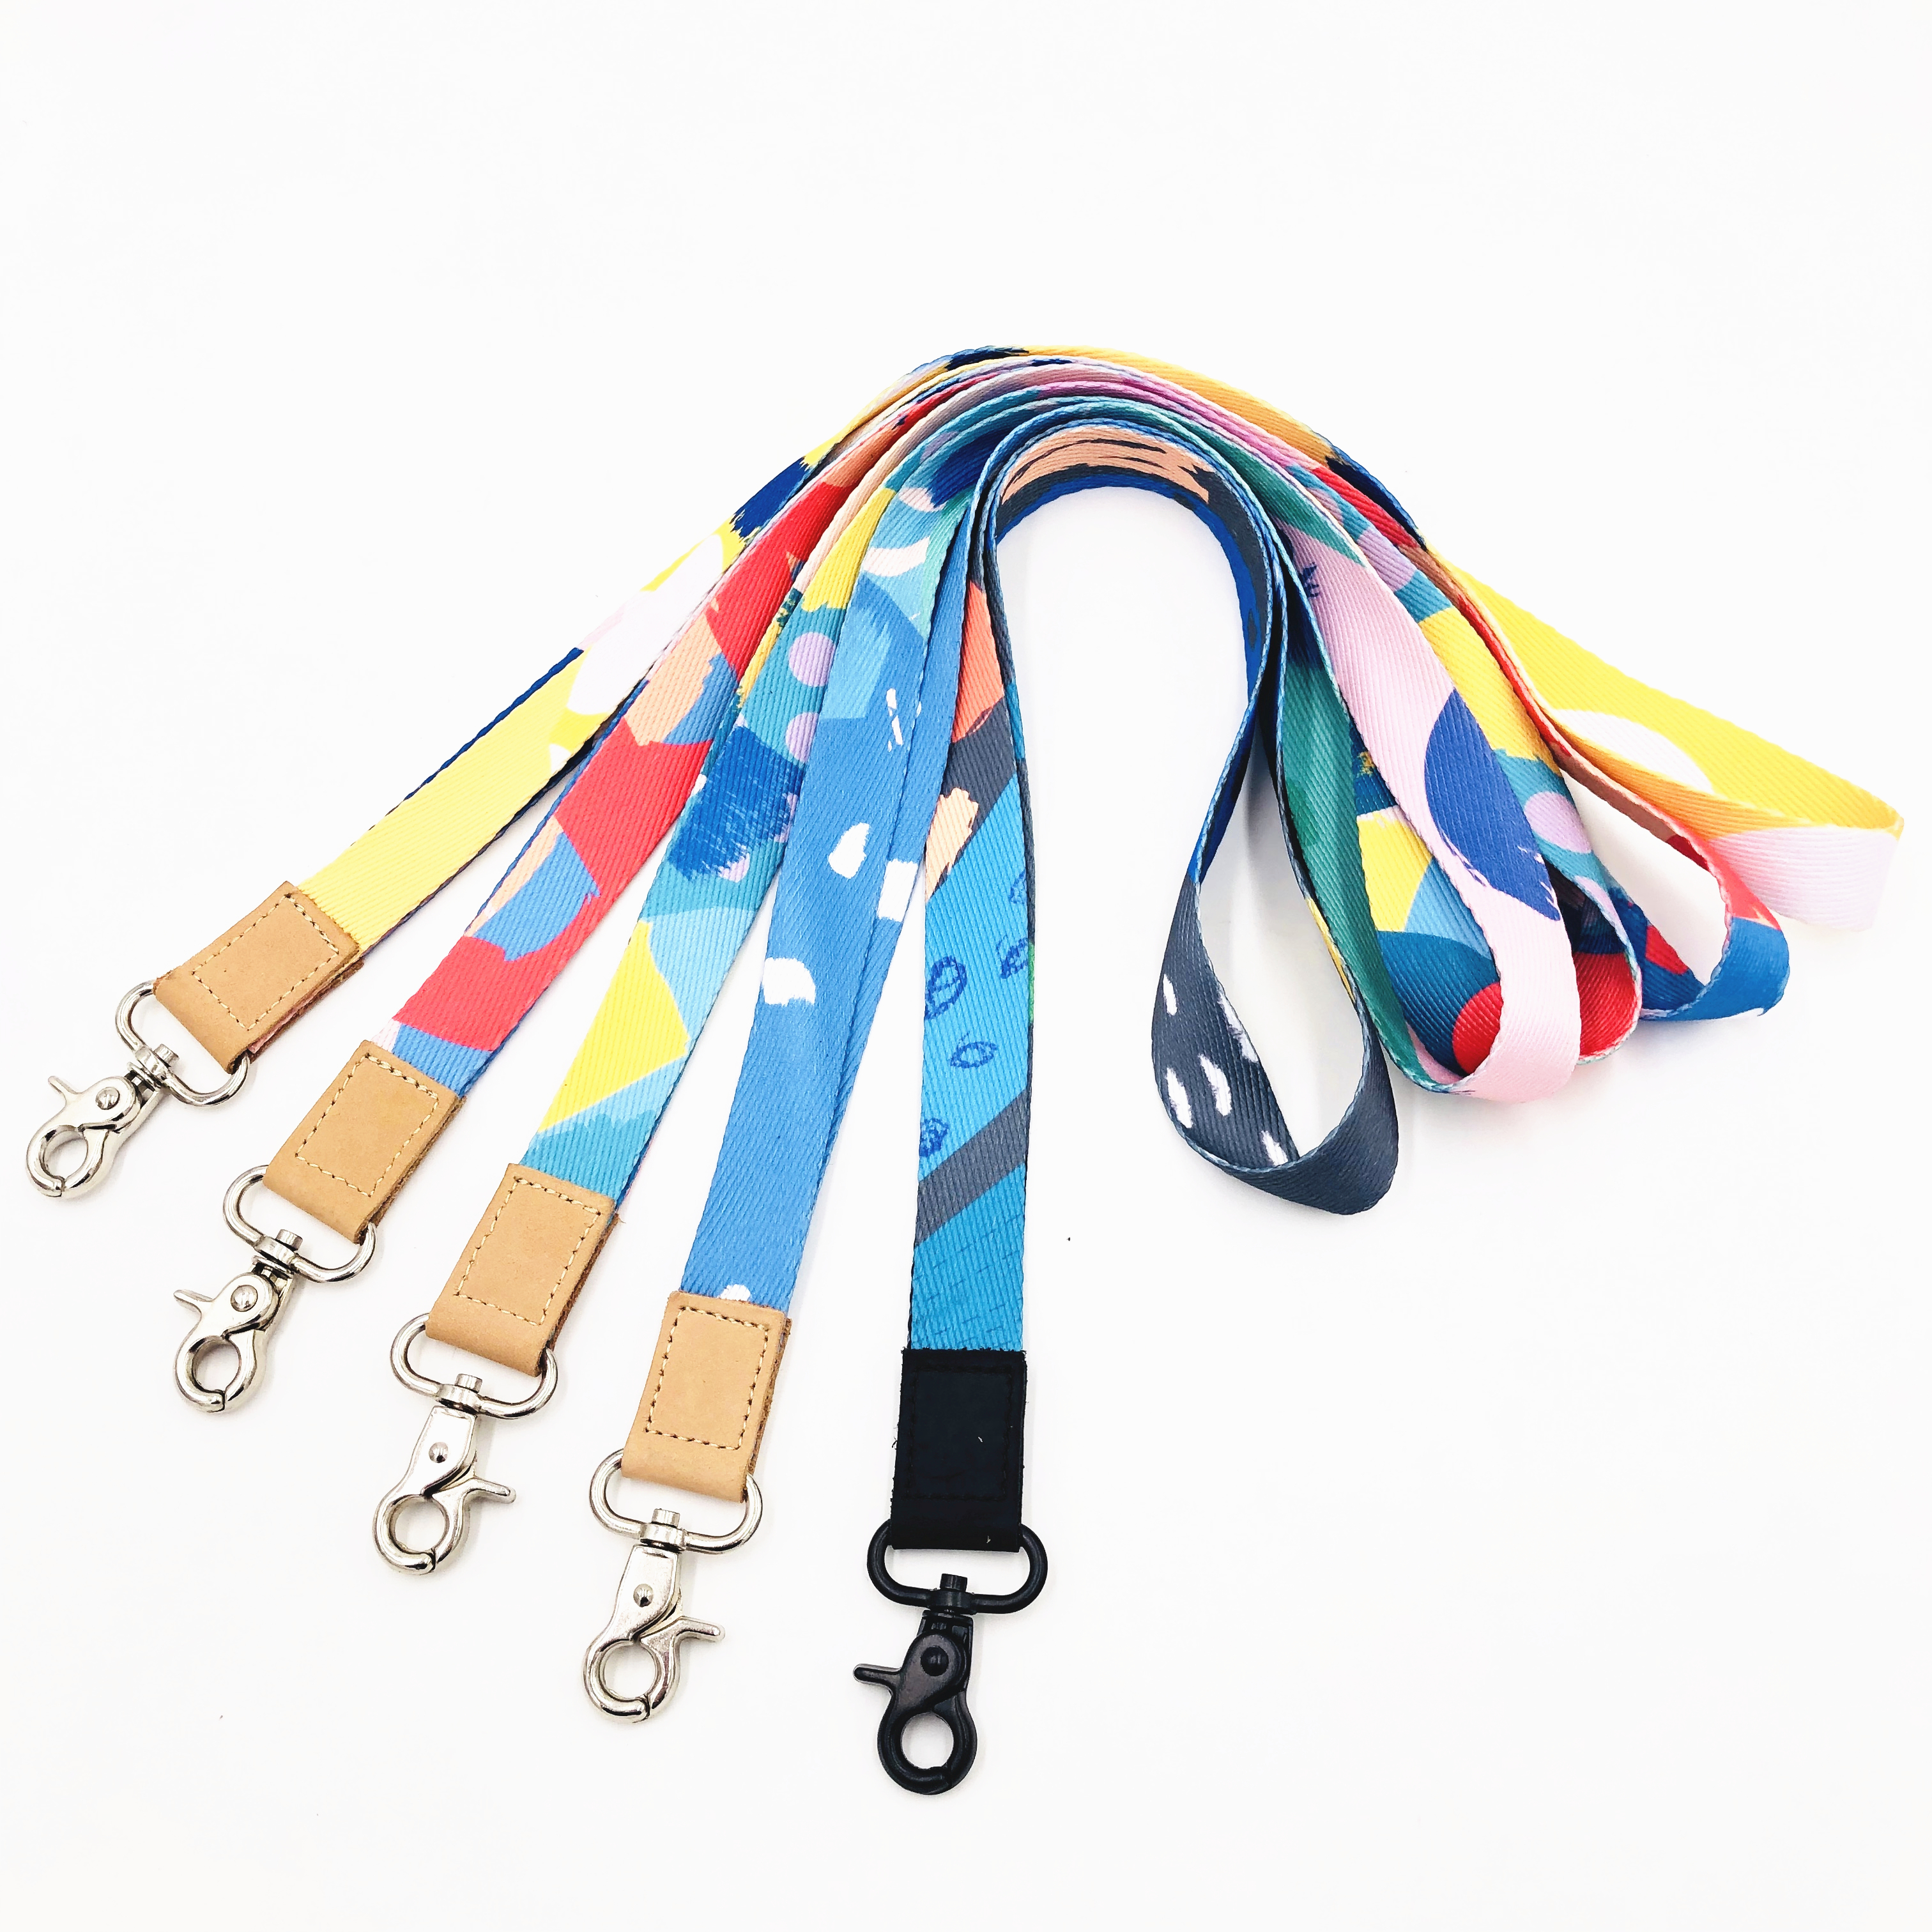 Professional China Lanyard Keychain For Printing - Keychain ID Holder Keyring Neck Strap  for Keys Phones Bags – Bison